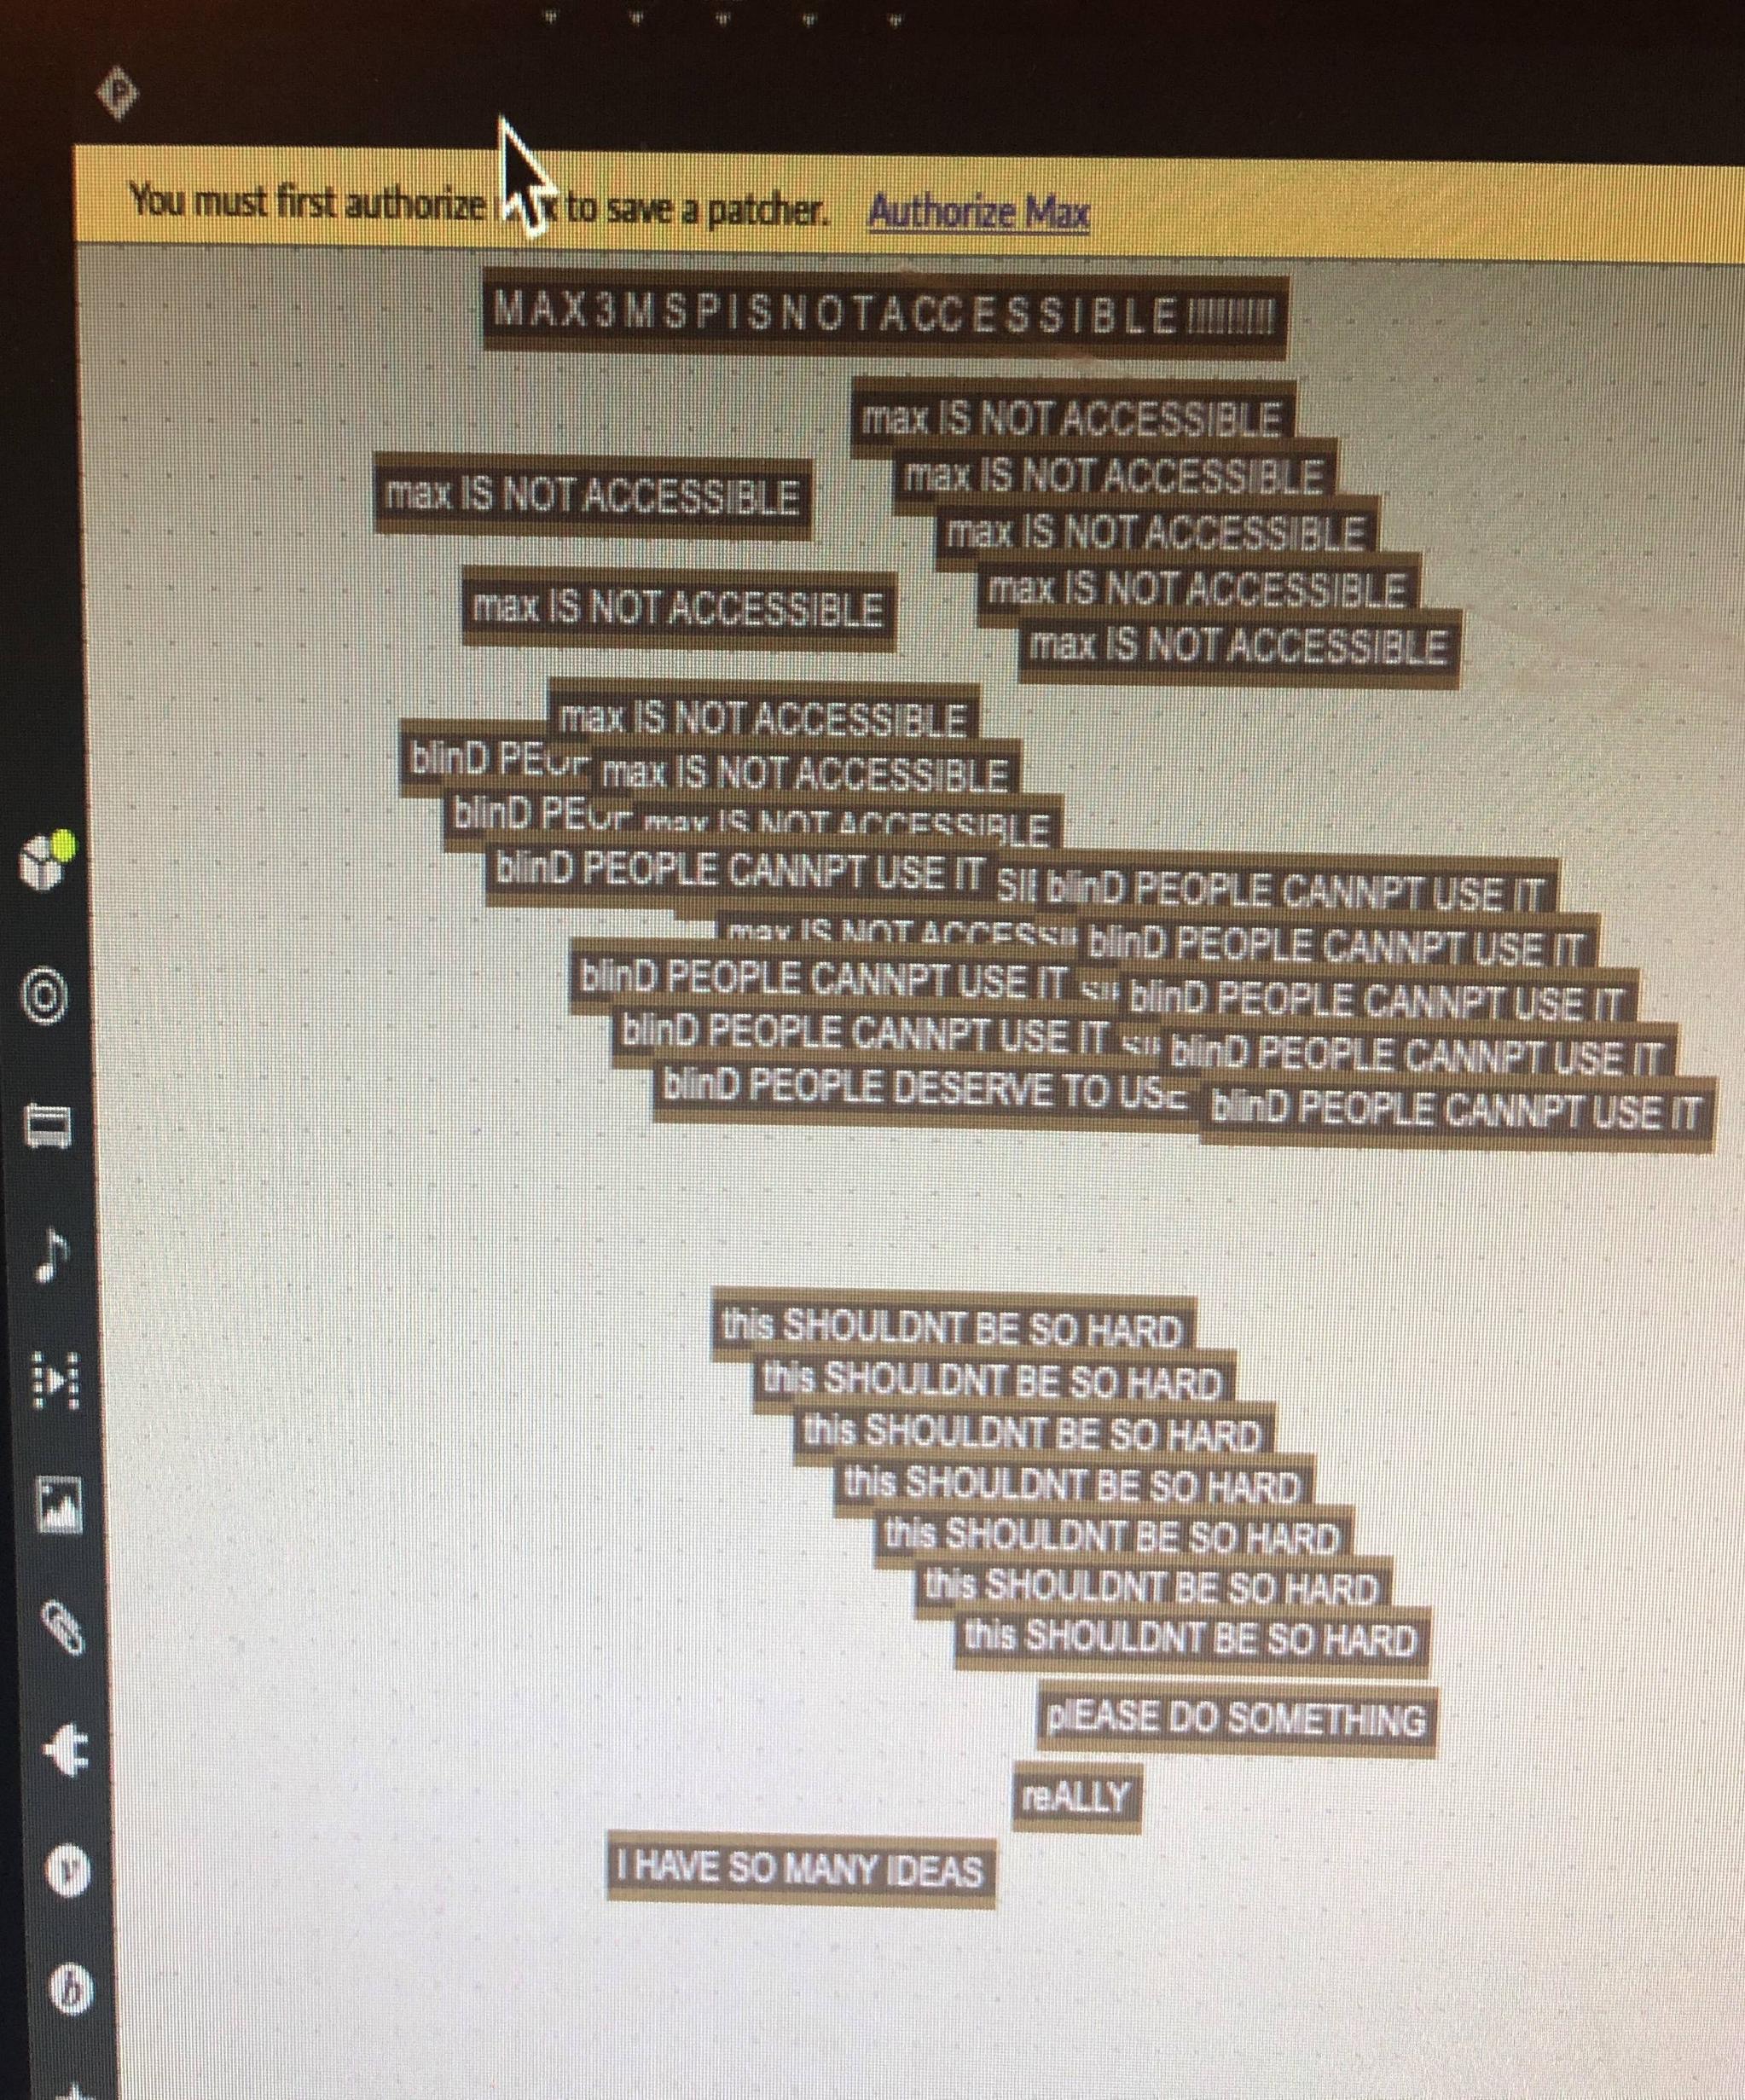 A photo of a computer screen that shows an open session in Max/MSP. Spread across the screen is a series of one line text. The text is repeated in 2 groups. Each text line is stacked atop each other. White text on a black background resembles a plastic strip from a label maker. The text of the top groups reads, “Max is not accessible” and is repeated over a dozen times. The lower group’s text read, “This shouldn’t be so hard.” This text is repeated over a dozen times. The text lines are staggered to look like a staircase.